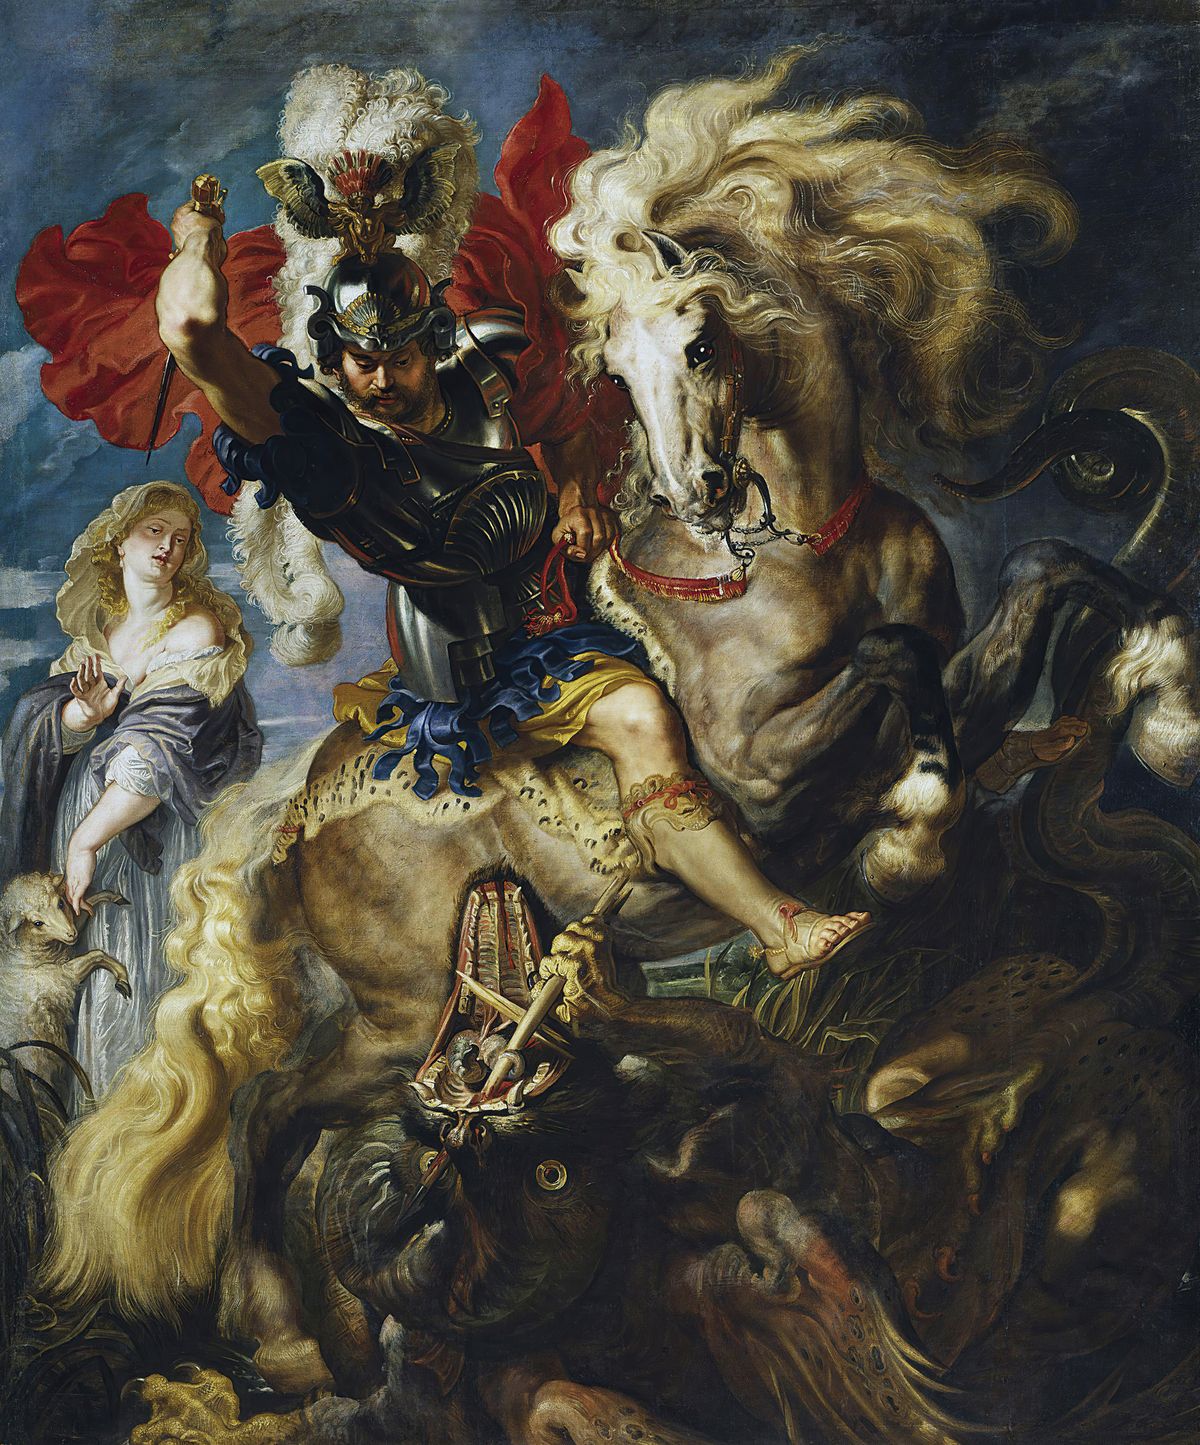 St George Battles The Dragon (1606-1608) by Peter Paul Rubens - Public Domain Catholic Painting